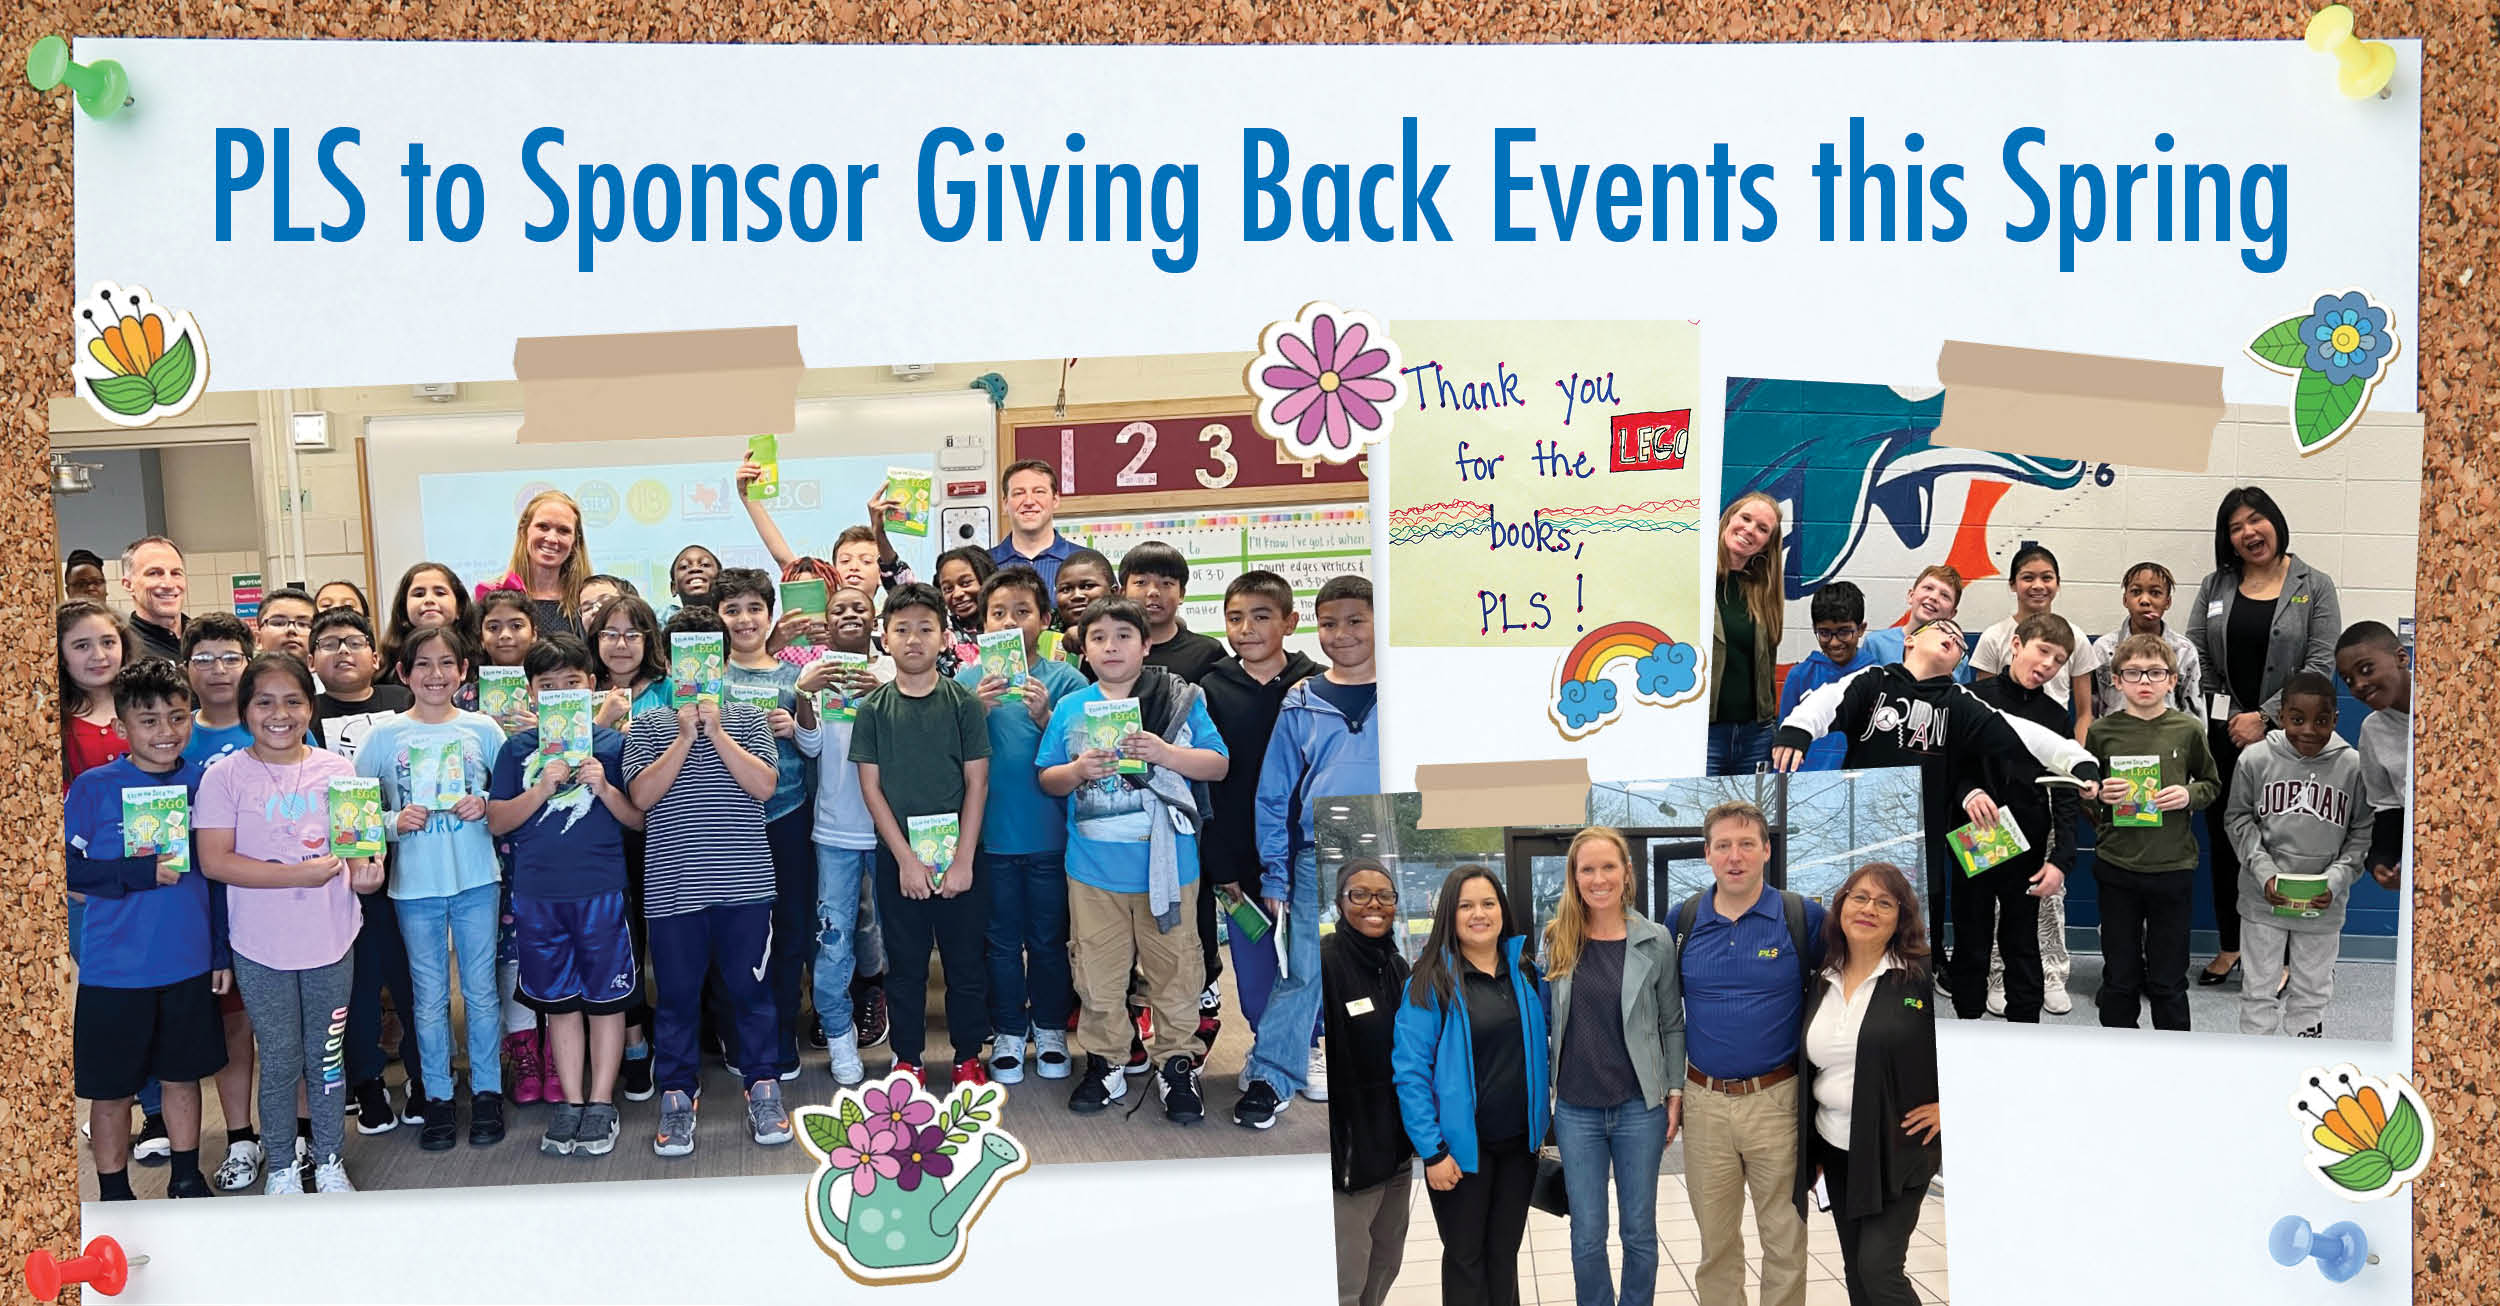 PLS TO SPONSOR GIVING BACK AUTHOR EVENTS THIS SPRING